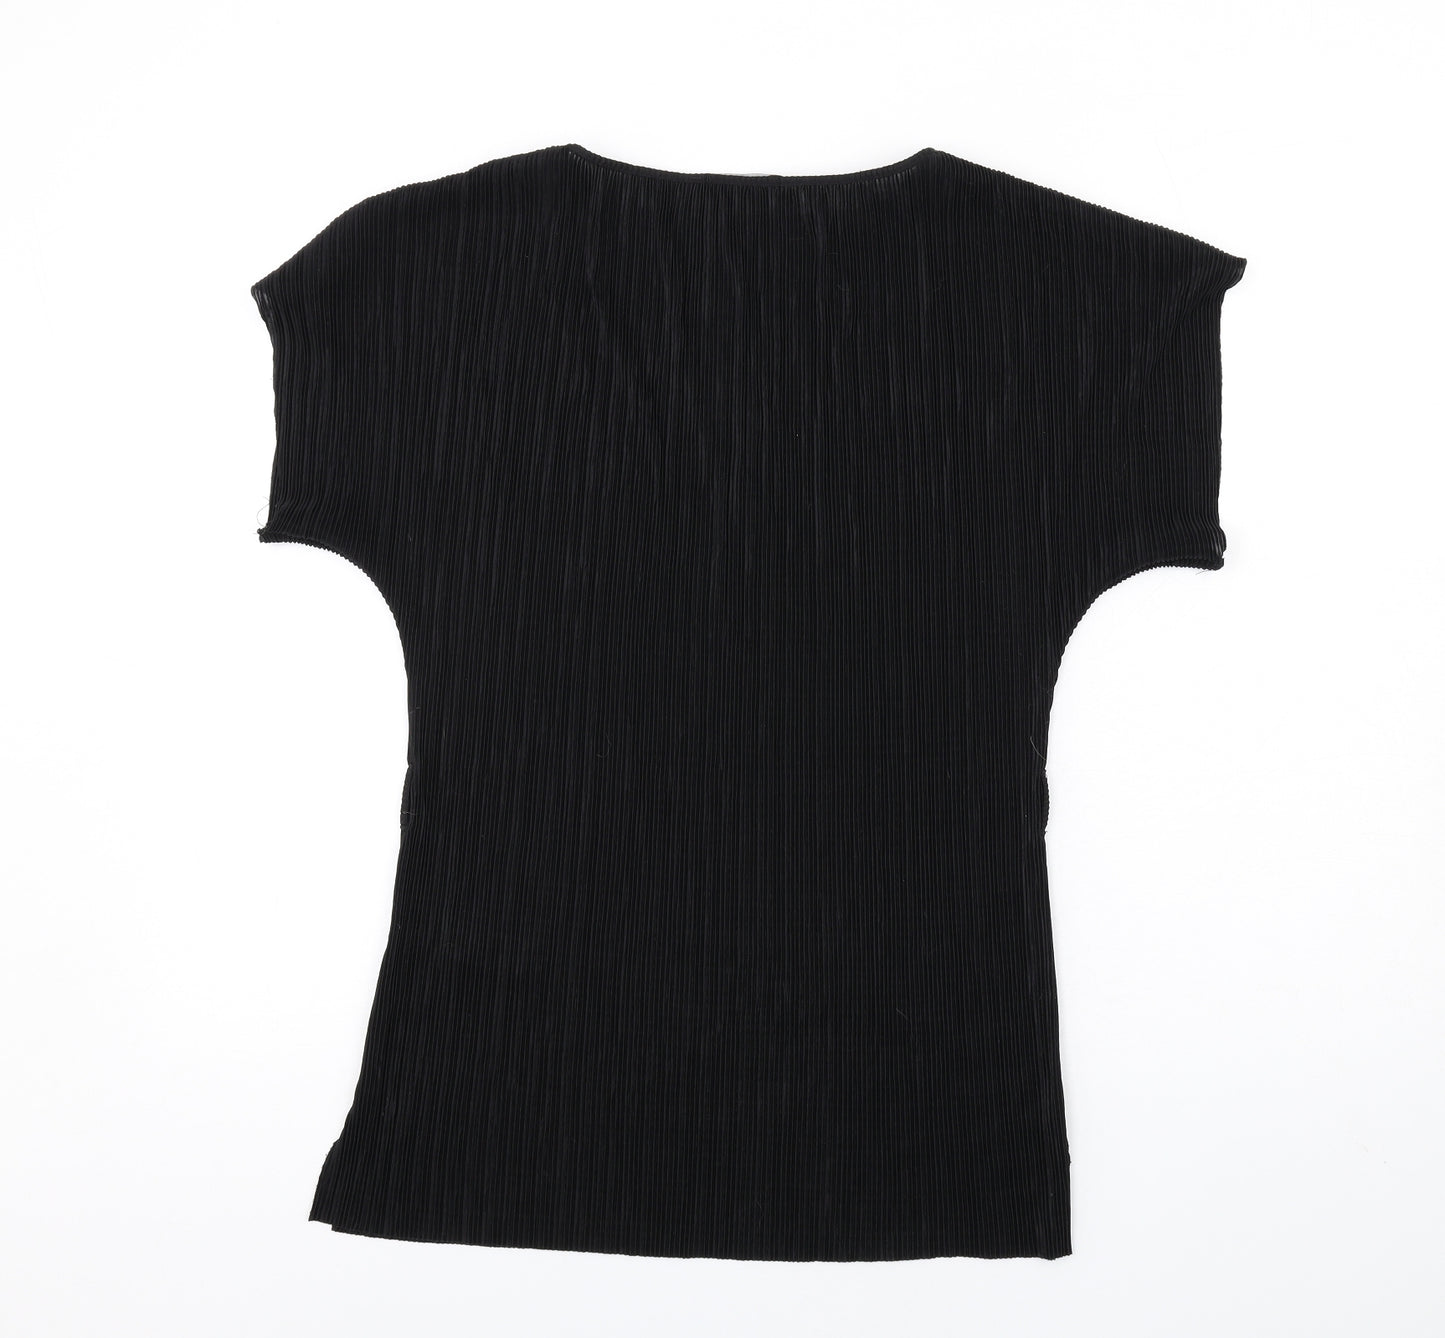 New Look Womens Black Polyester Basic T-Shirt Size 12 Round Neck - Pleated